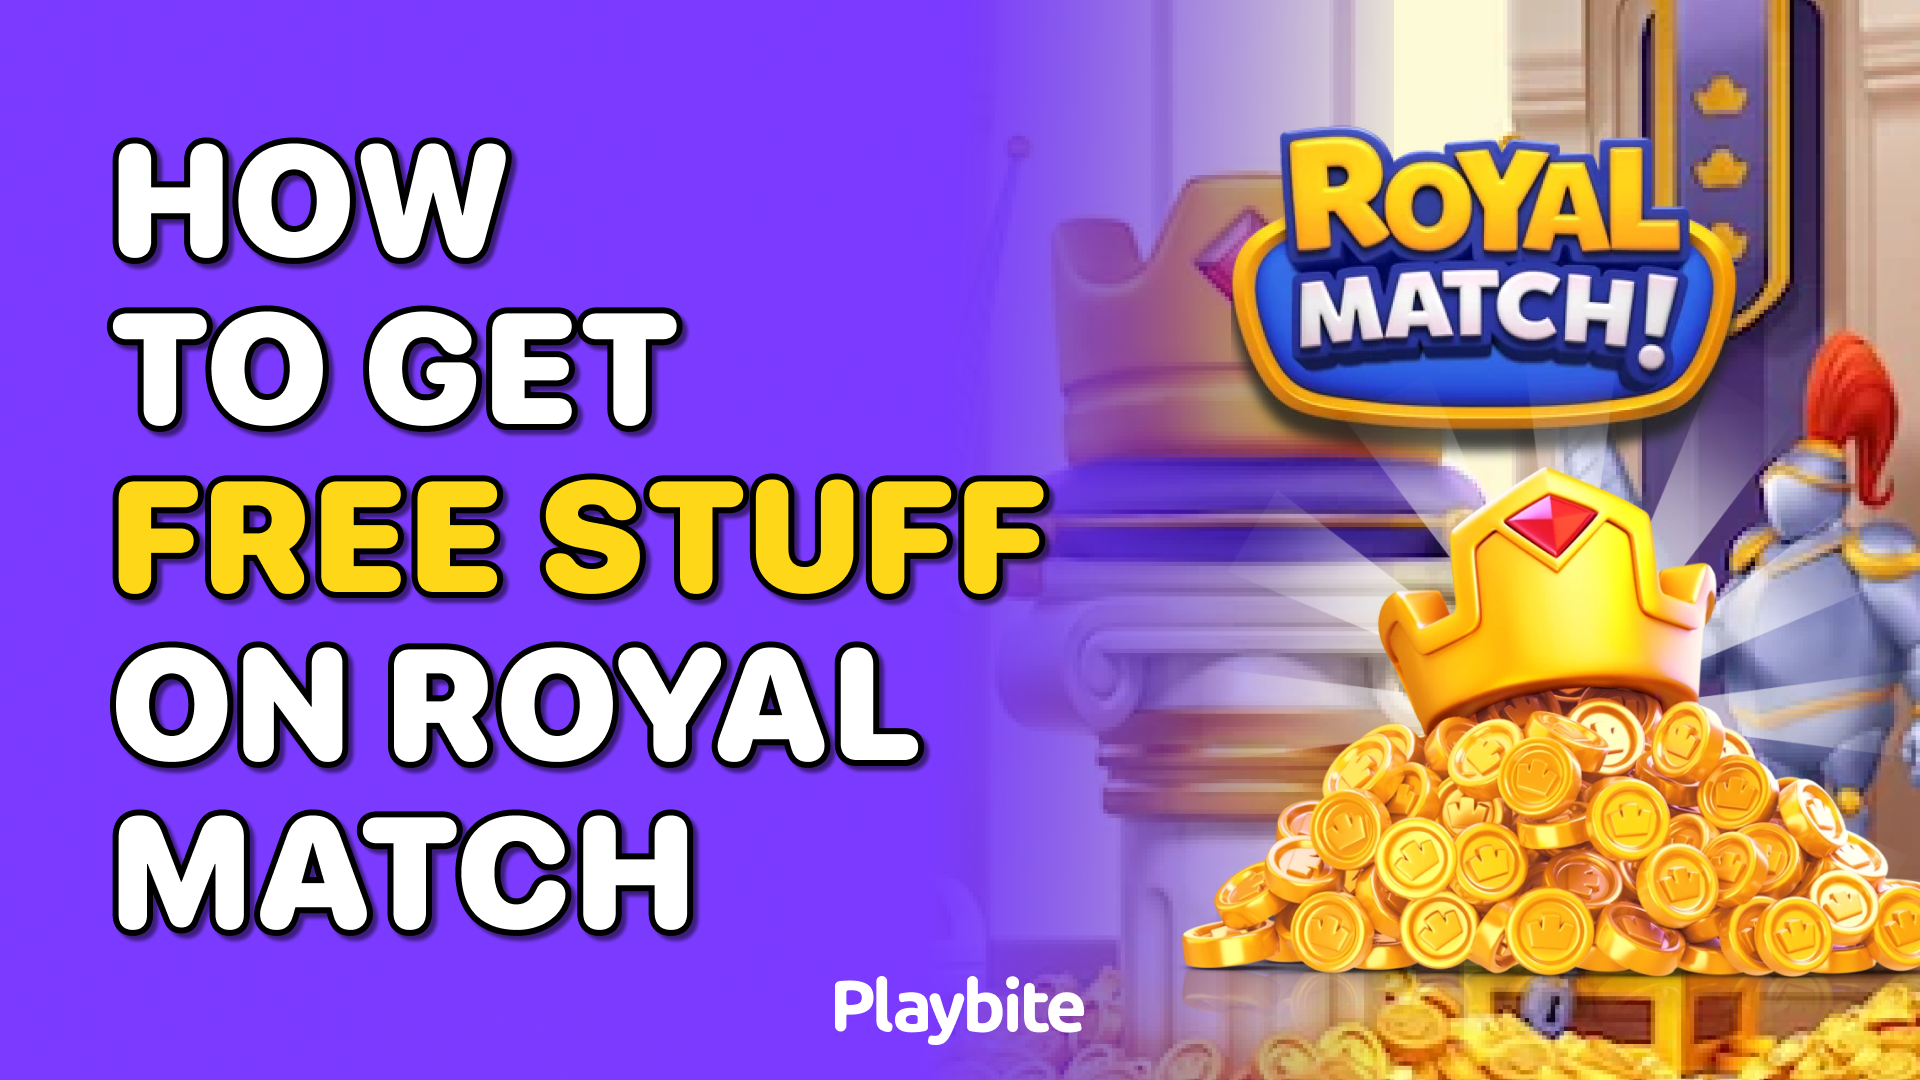 How to Get Free Stuff on Royal Match